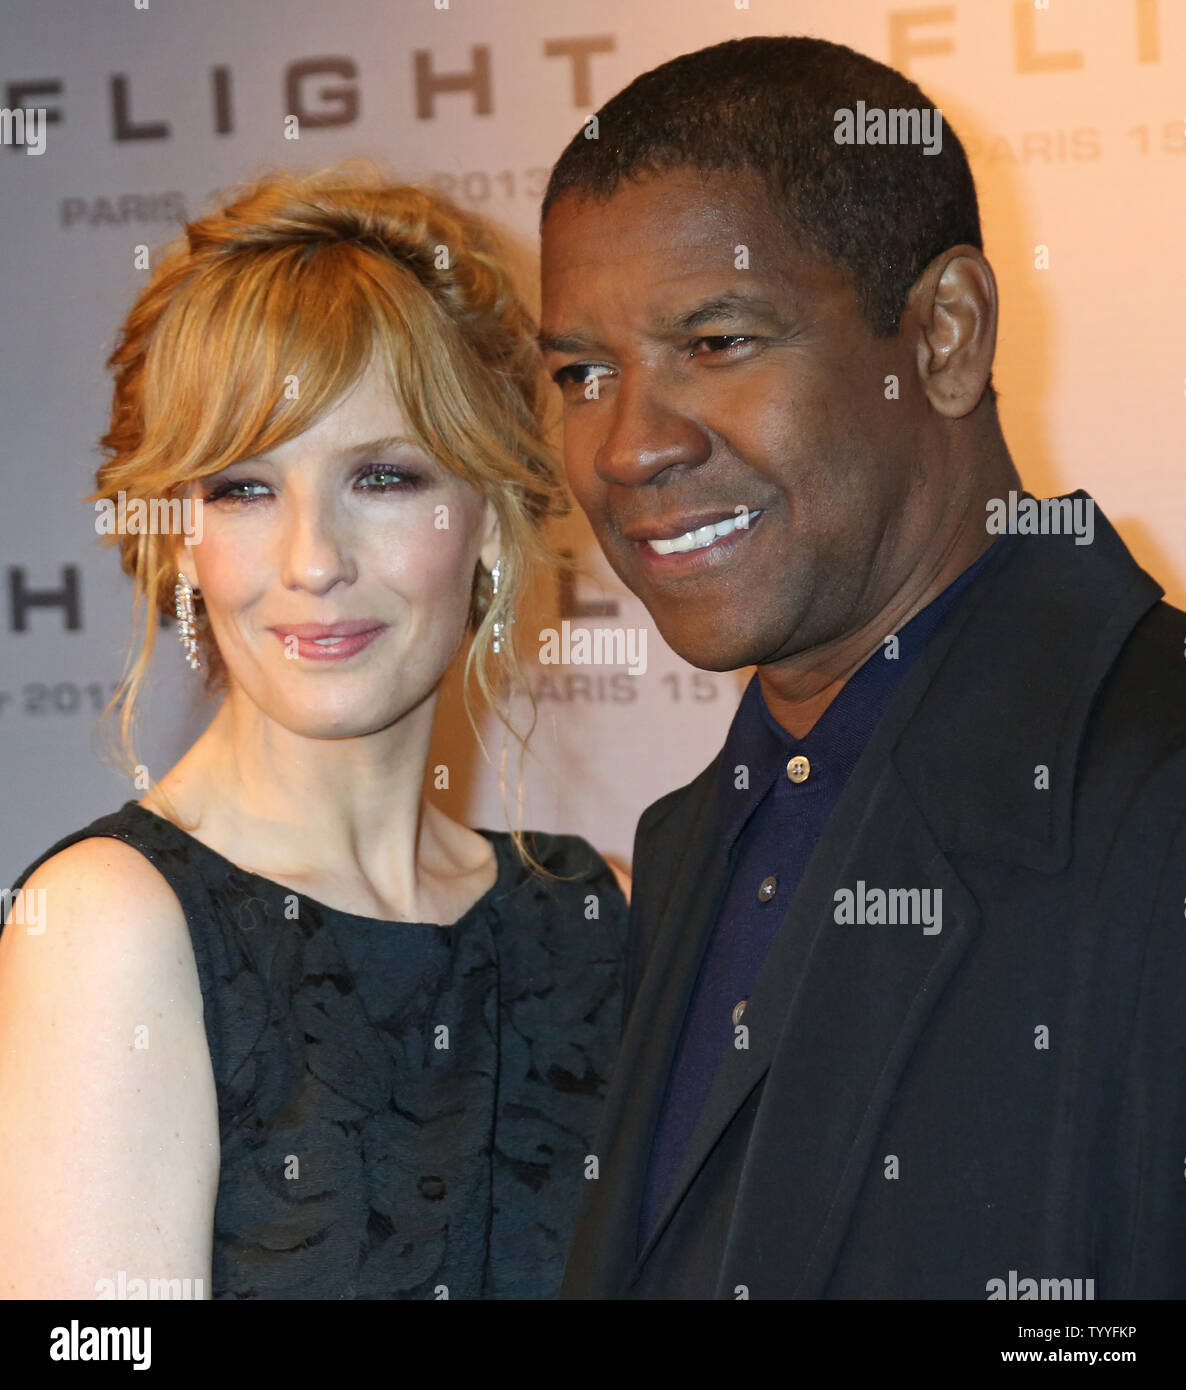 Kelly Reilly (L) and Denzel Washington arrive at the French premiere of the film 'Flight' in Paris on January 15, 2013.   UPI/David Silpa. Stock Photo